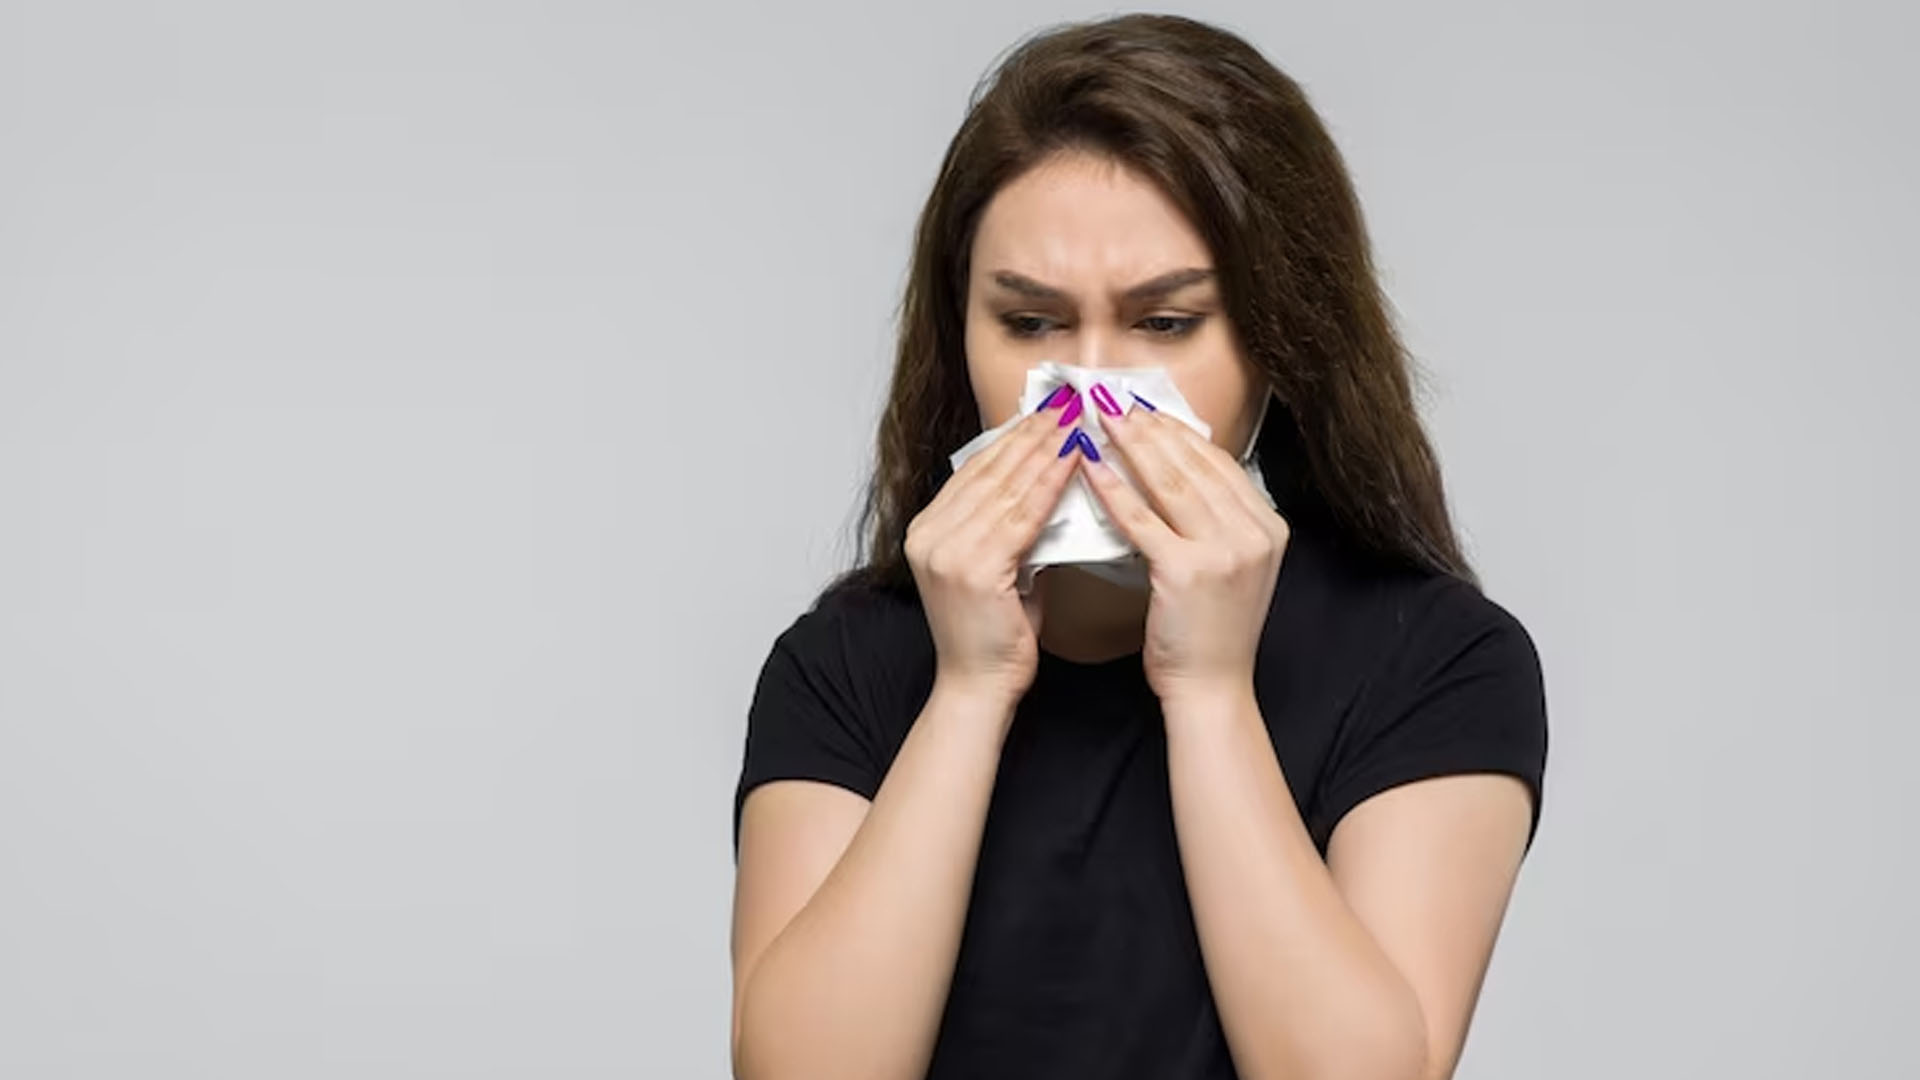 Is Runny Nose A Symptom of Covid?